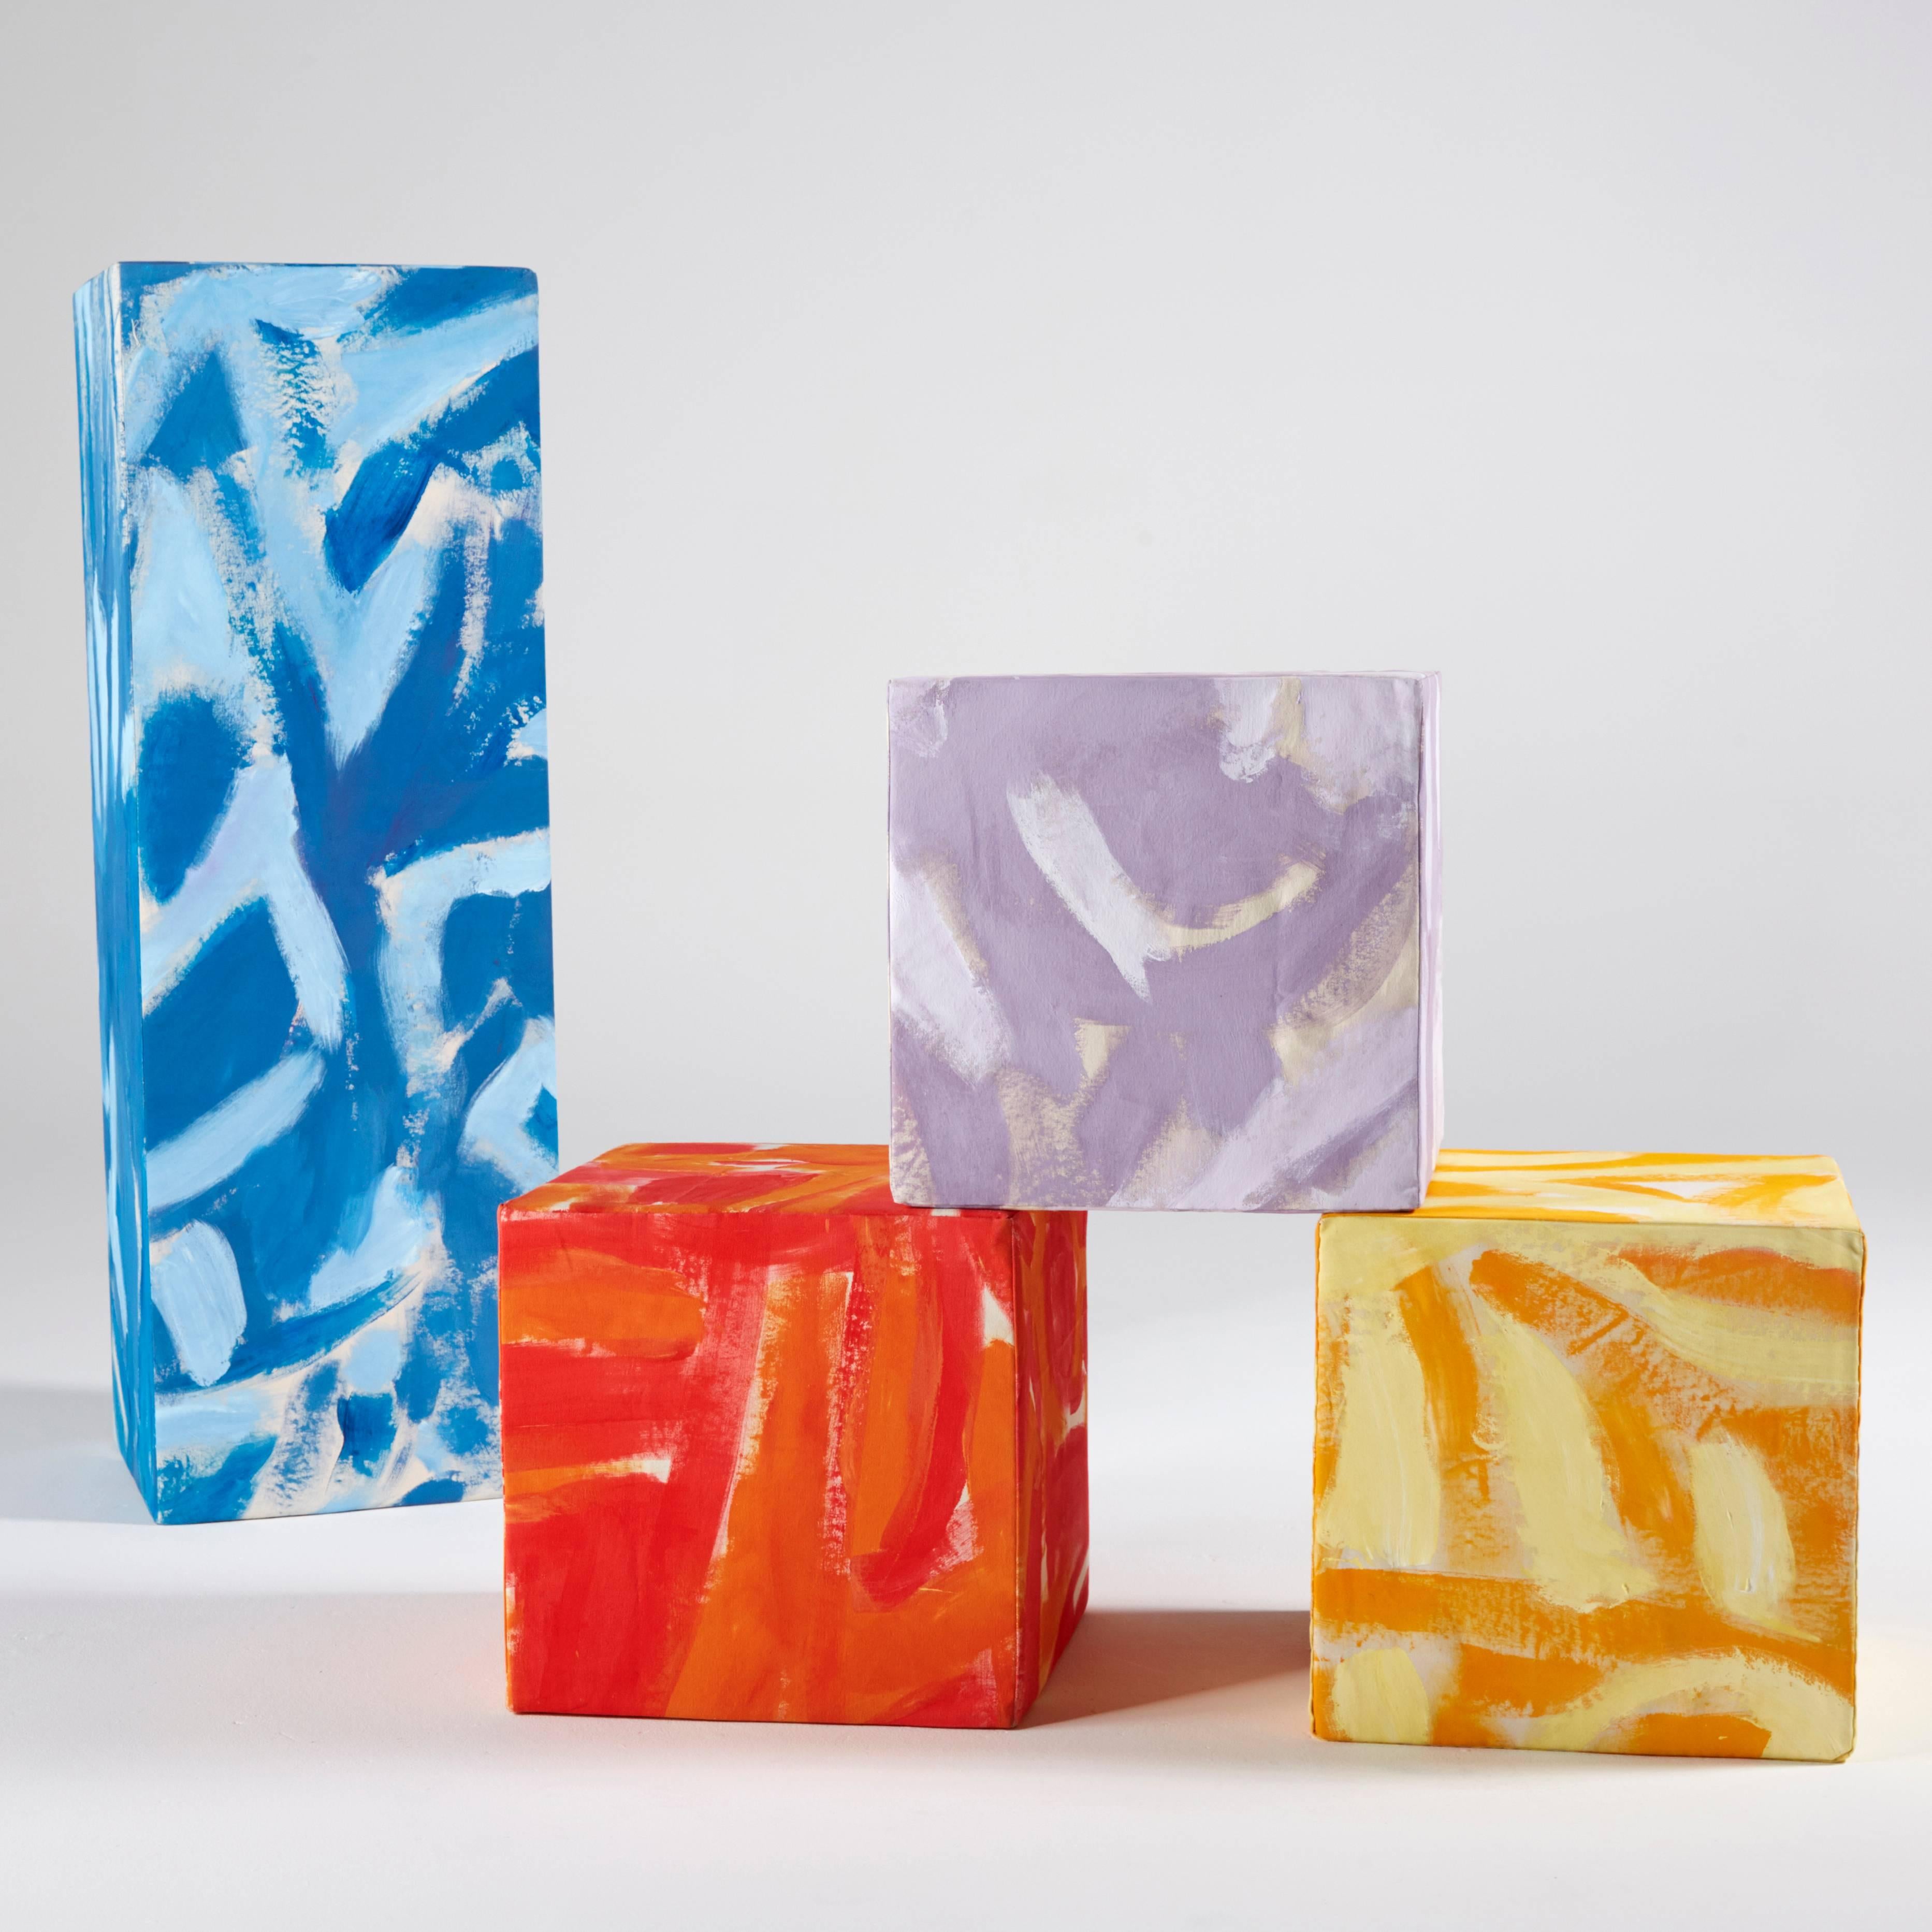 Cubicles by Naomi Clark is a set of three hand-painted stuffed squares and one stuffed rectangle that together make multiple sculptural configurations and seating arrangements. This set of soft sculptures, painted in Naomi’s signature Two-Hue style,